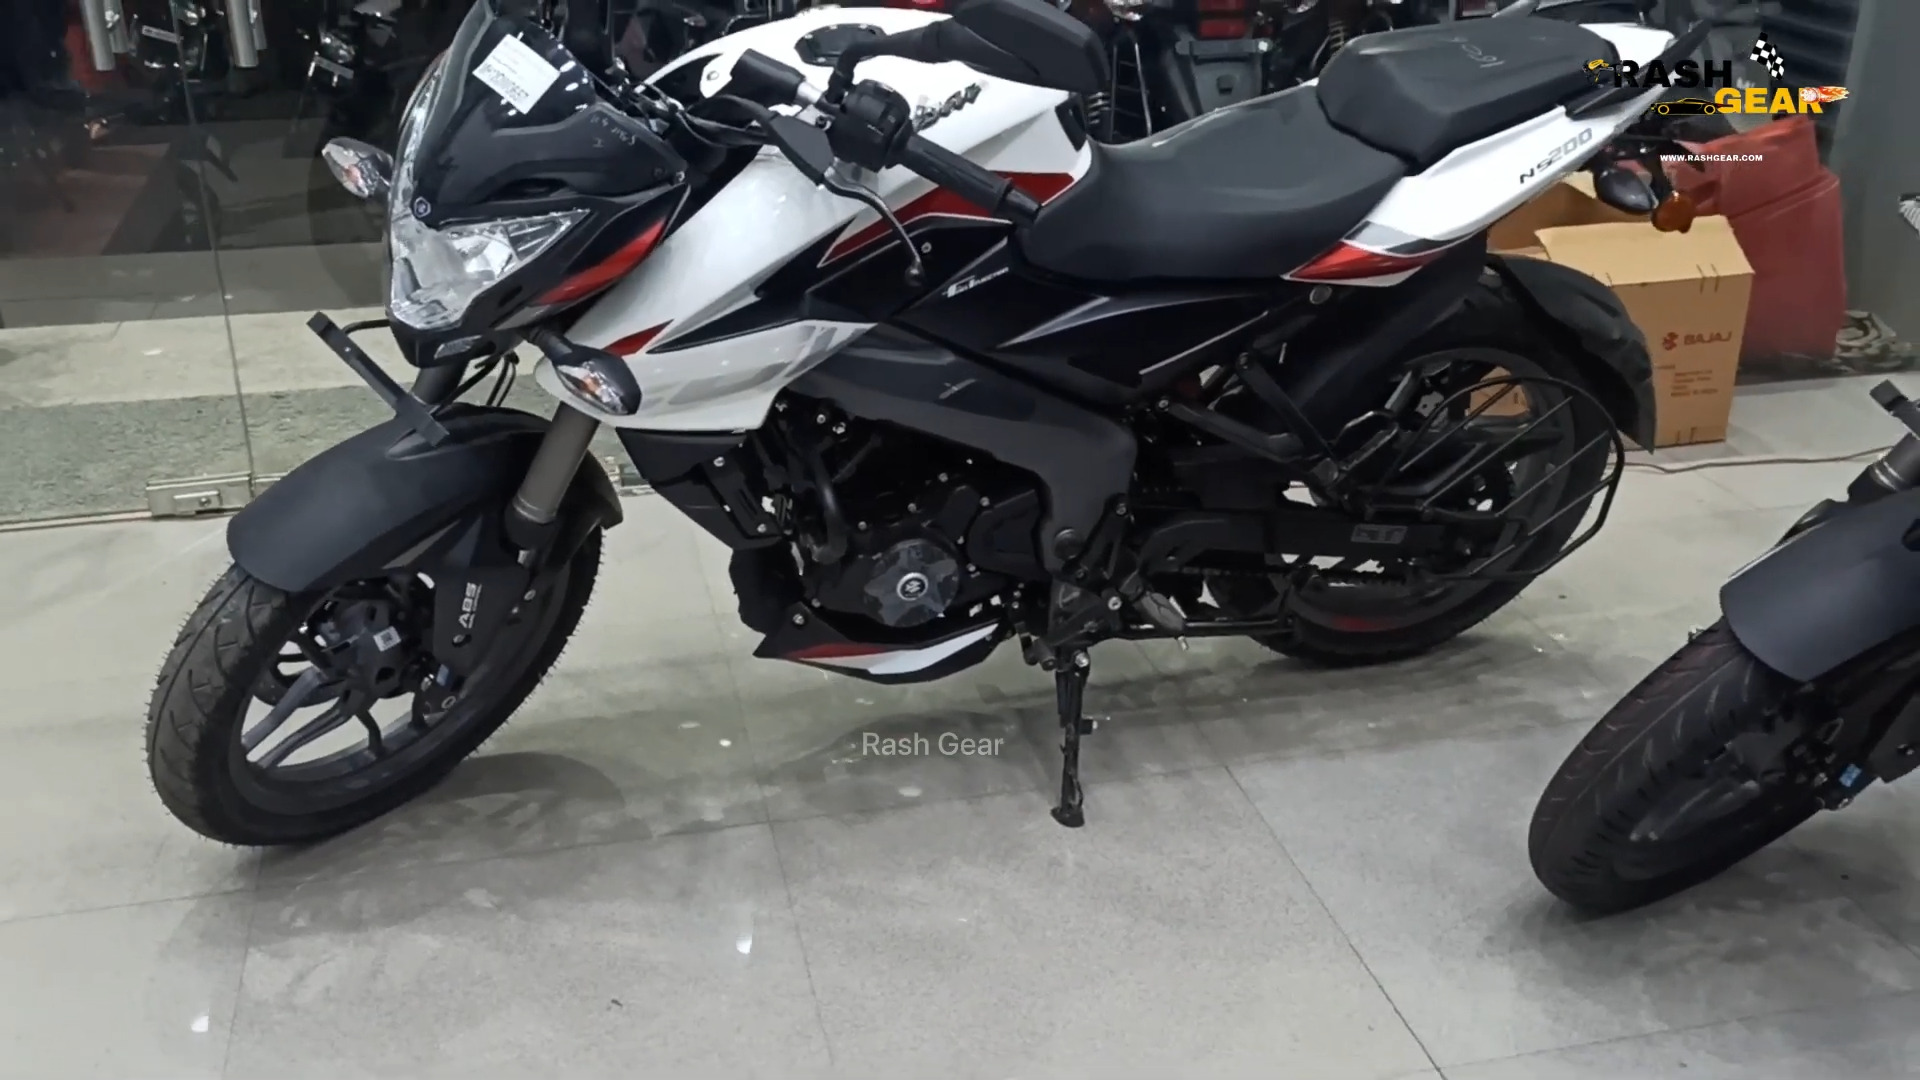 2023 Bajaj Pulsar NS200 Fully Leaked Ahead of Launch in India - close-up